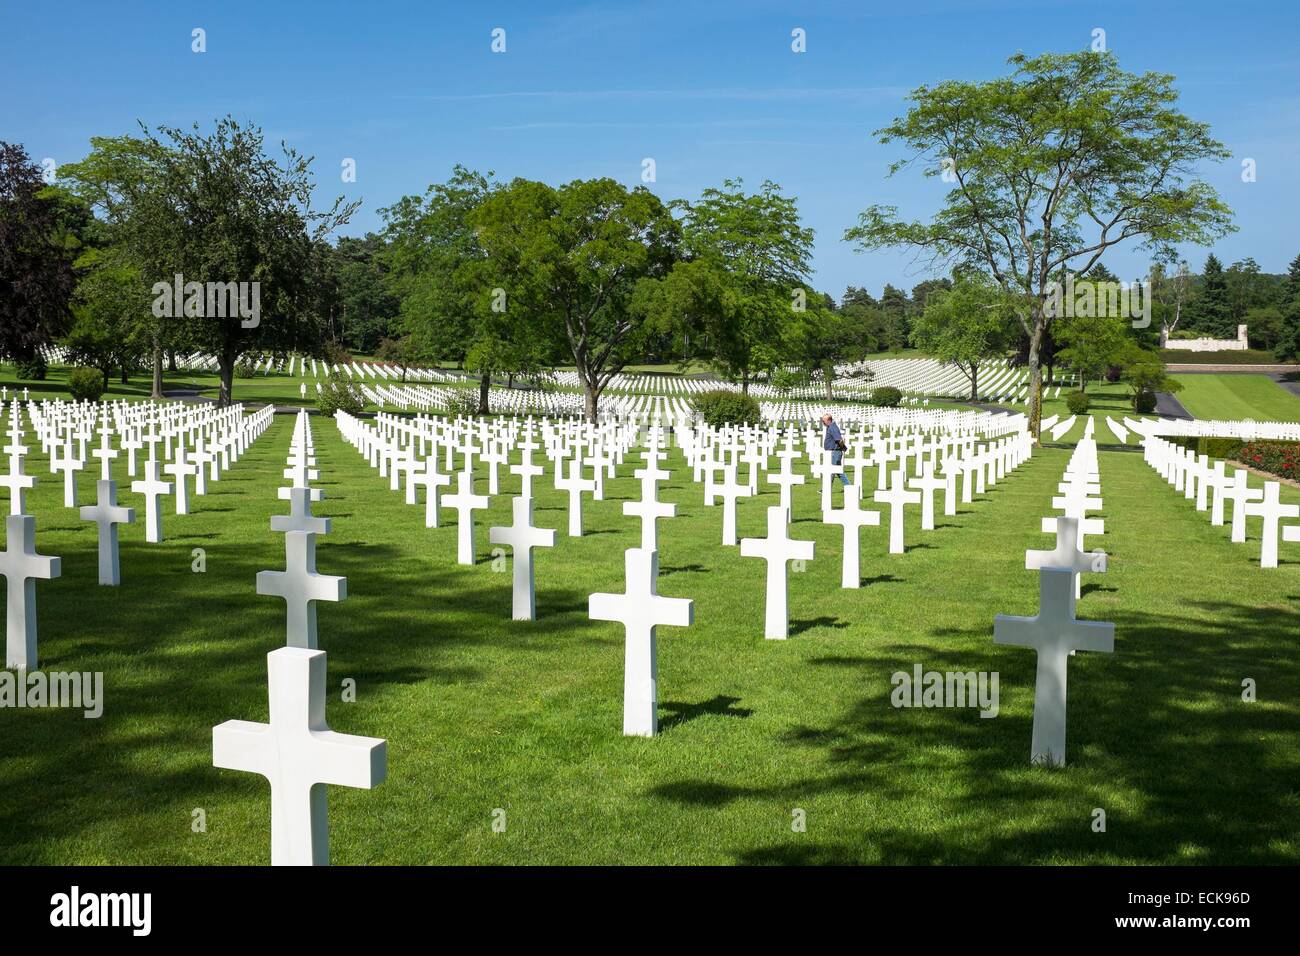 France, Moselle, Saint-Avold, Lorraine American Cemetery and Memorial, the largest American World War II cemetery in Europe Stock Photo